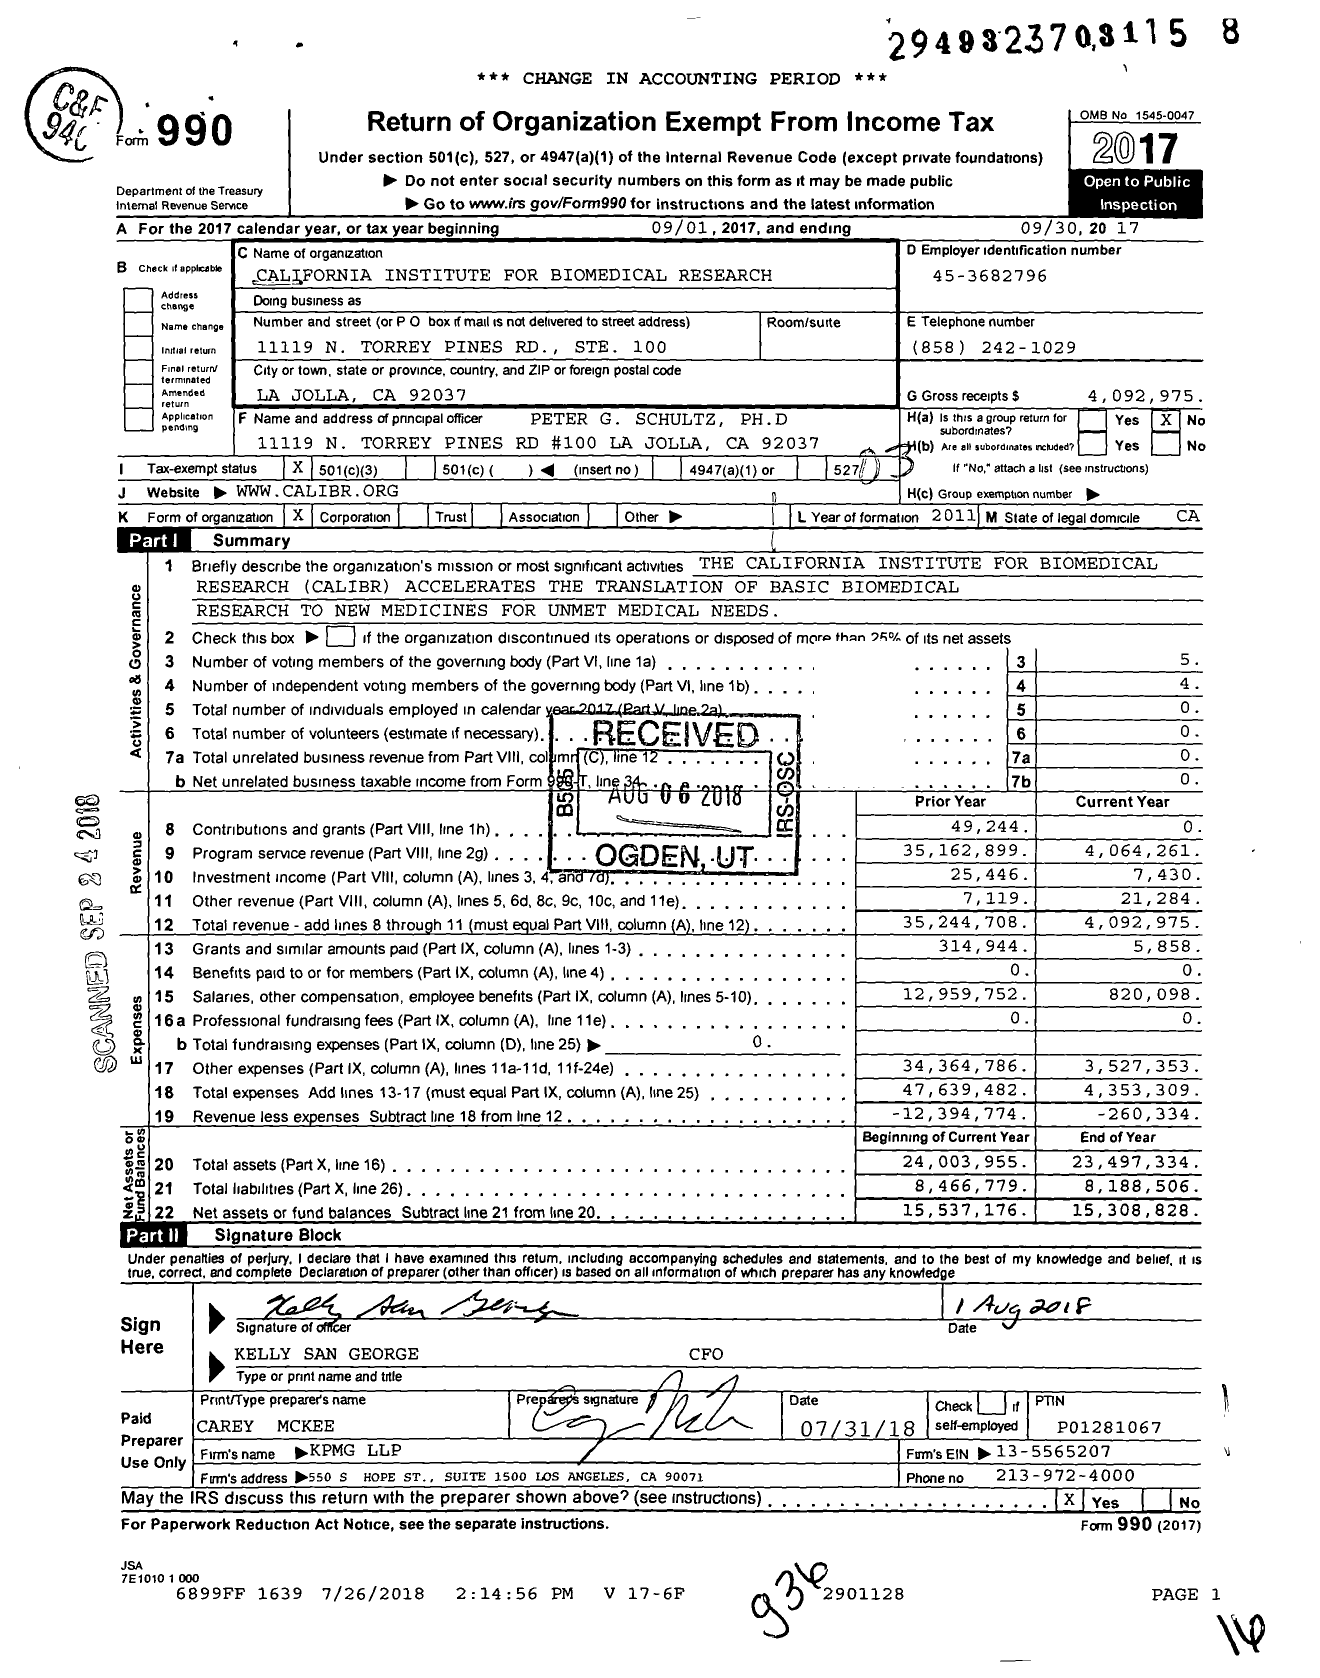 Image of first page of 2016 Form 990 for The California Institute for Biomedical Research (Calibr)